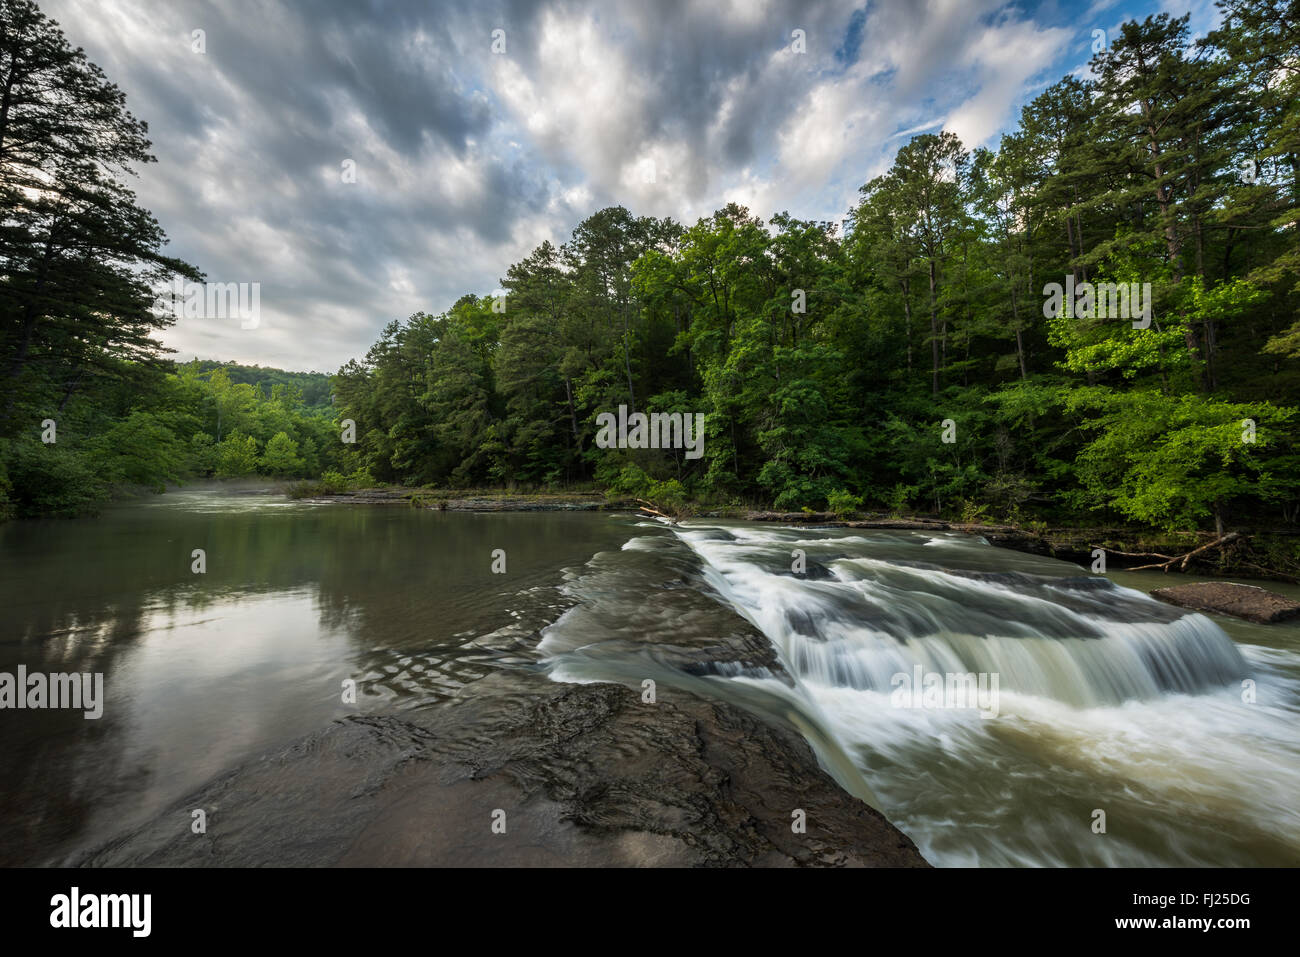 Waterfall in the Ozark National Forest under cloudy skies. Stock Photo